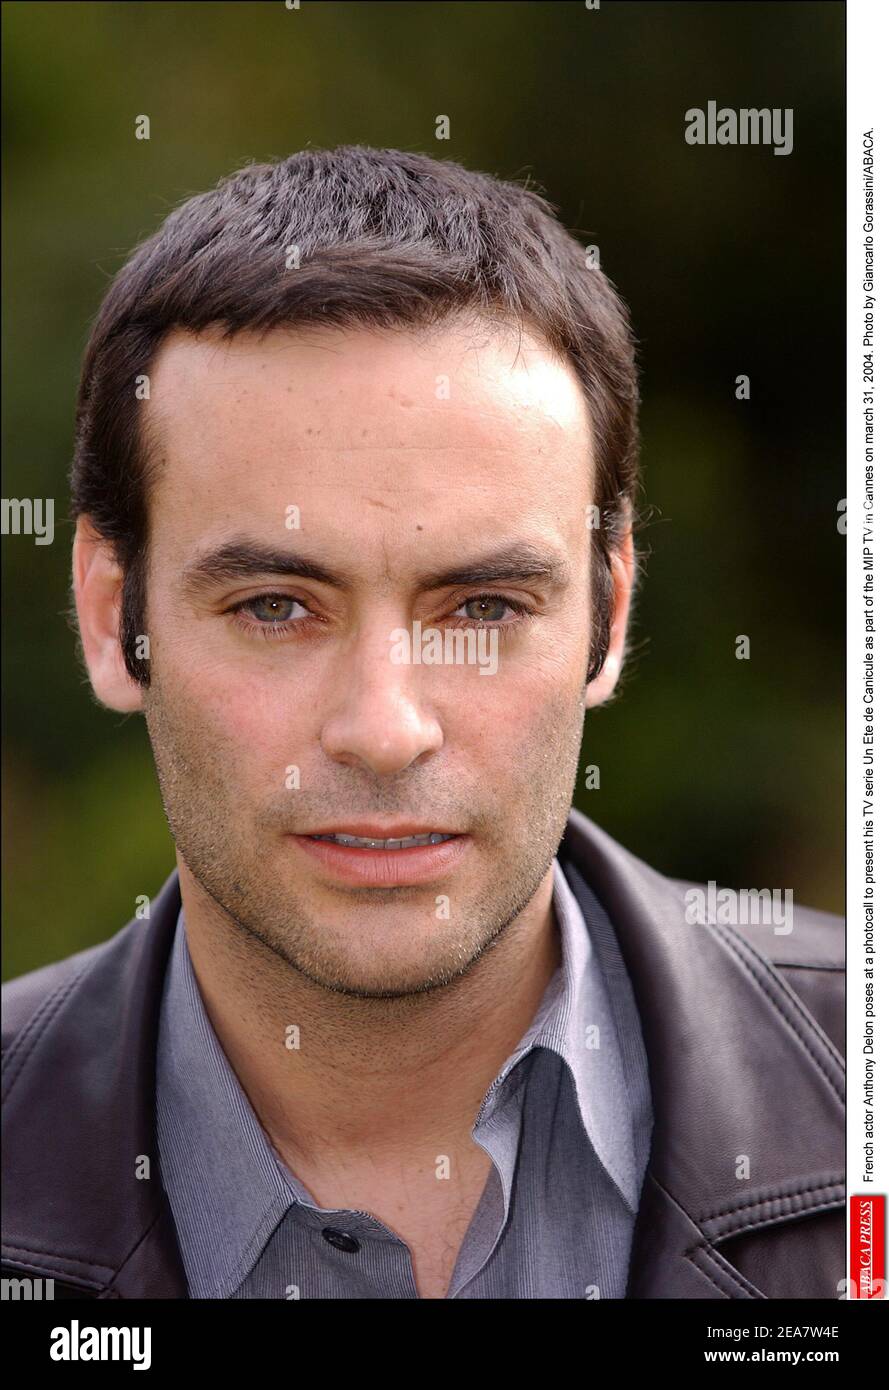 French actor Anthony Delon poses at a photocall to present his TV serie Un Ete de Canicule as part of the MIP TV in Cannes on march 31, 2004. Photo by Giancarlo Gorassini/ABACA. Stock Photo